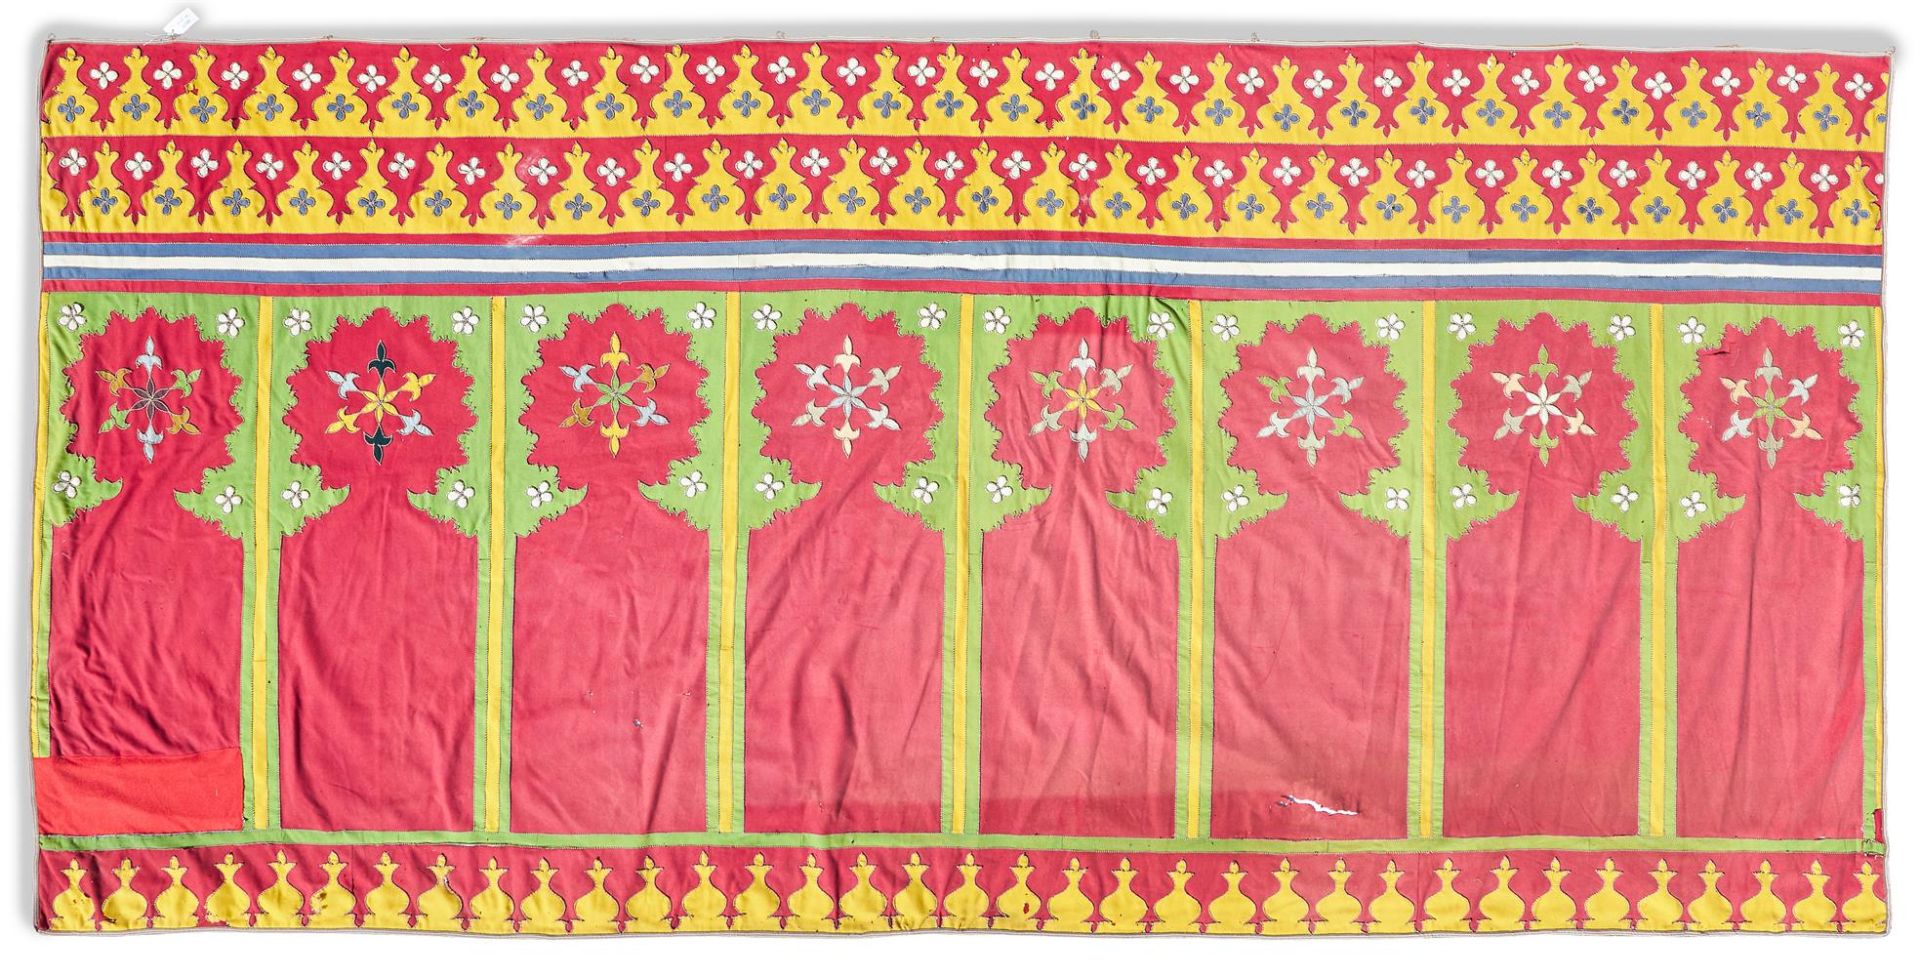 A LARGE MORROCAN VELVET AND SILK 'HAITI' WALL HANGING, LATE 19TH/EARLY 20TH CENTURY